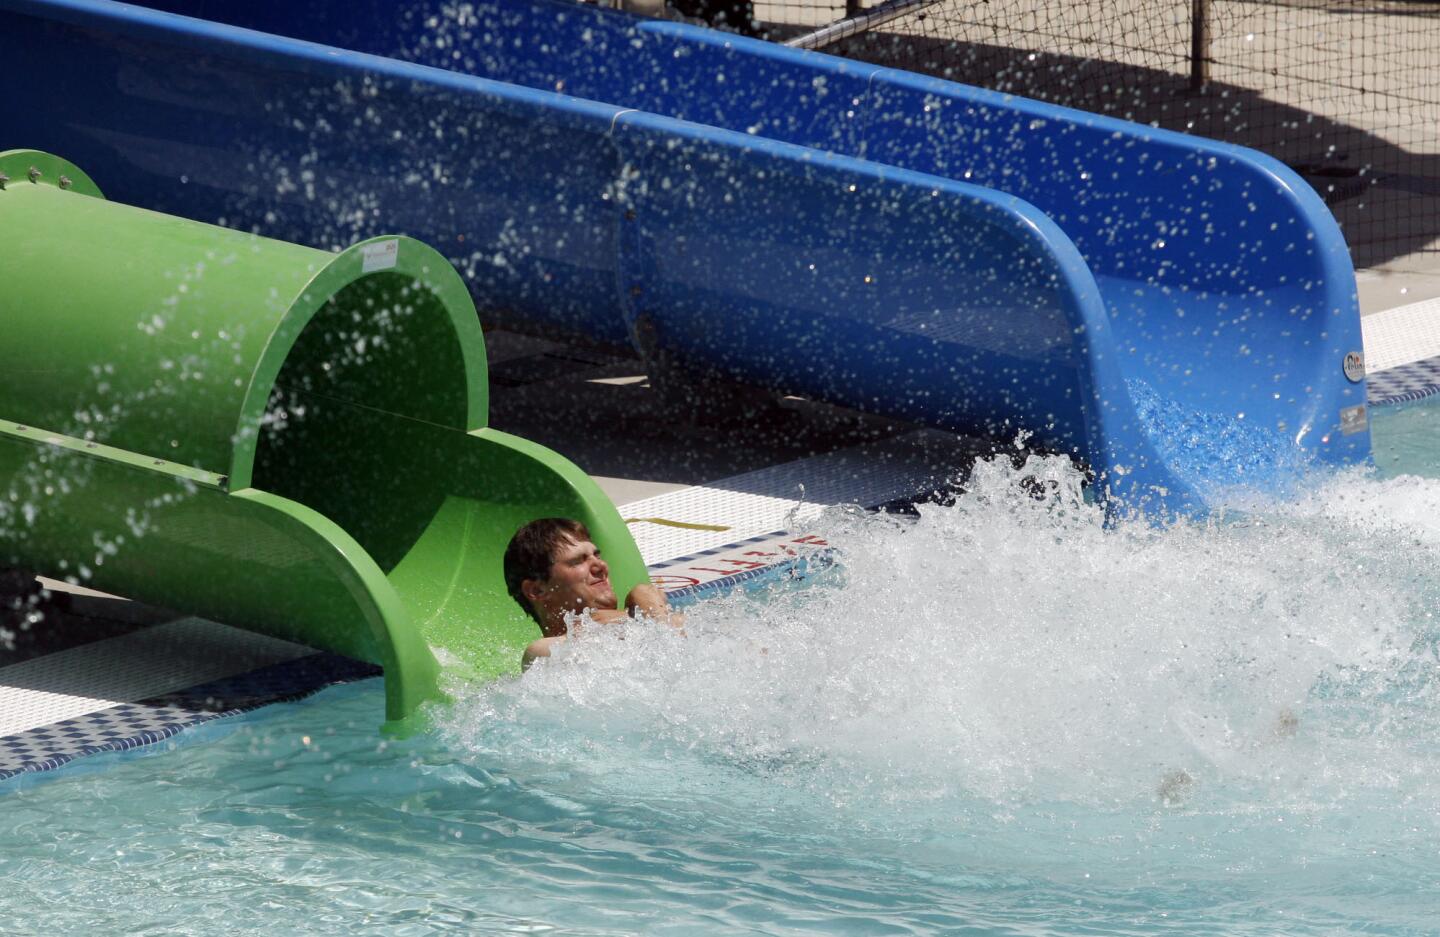 Richard Nigra tries out the water slides at Verdugo Aquatic Center pool in Burbank on Wednesday, May 22, 2013. The pool was remodeled into an olympic size pool and an activity pool with slides was also added to the pool area. The pool will open soon.